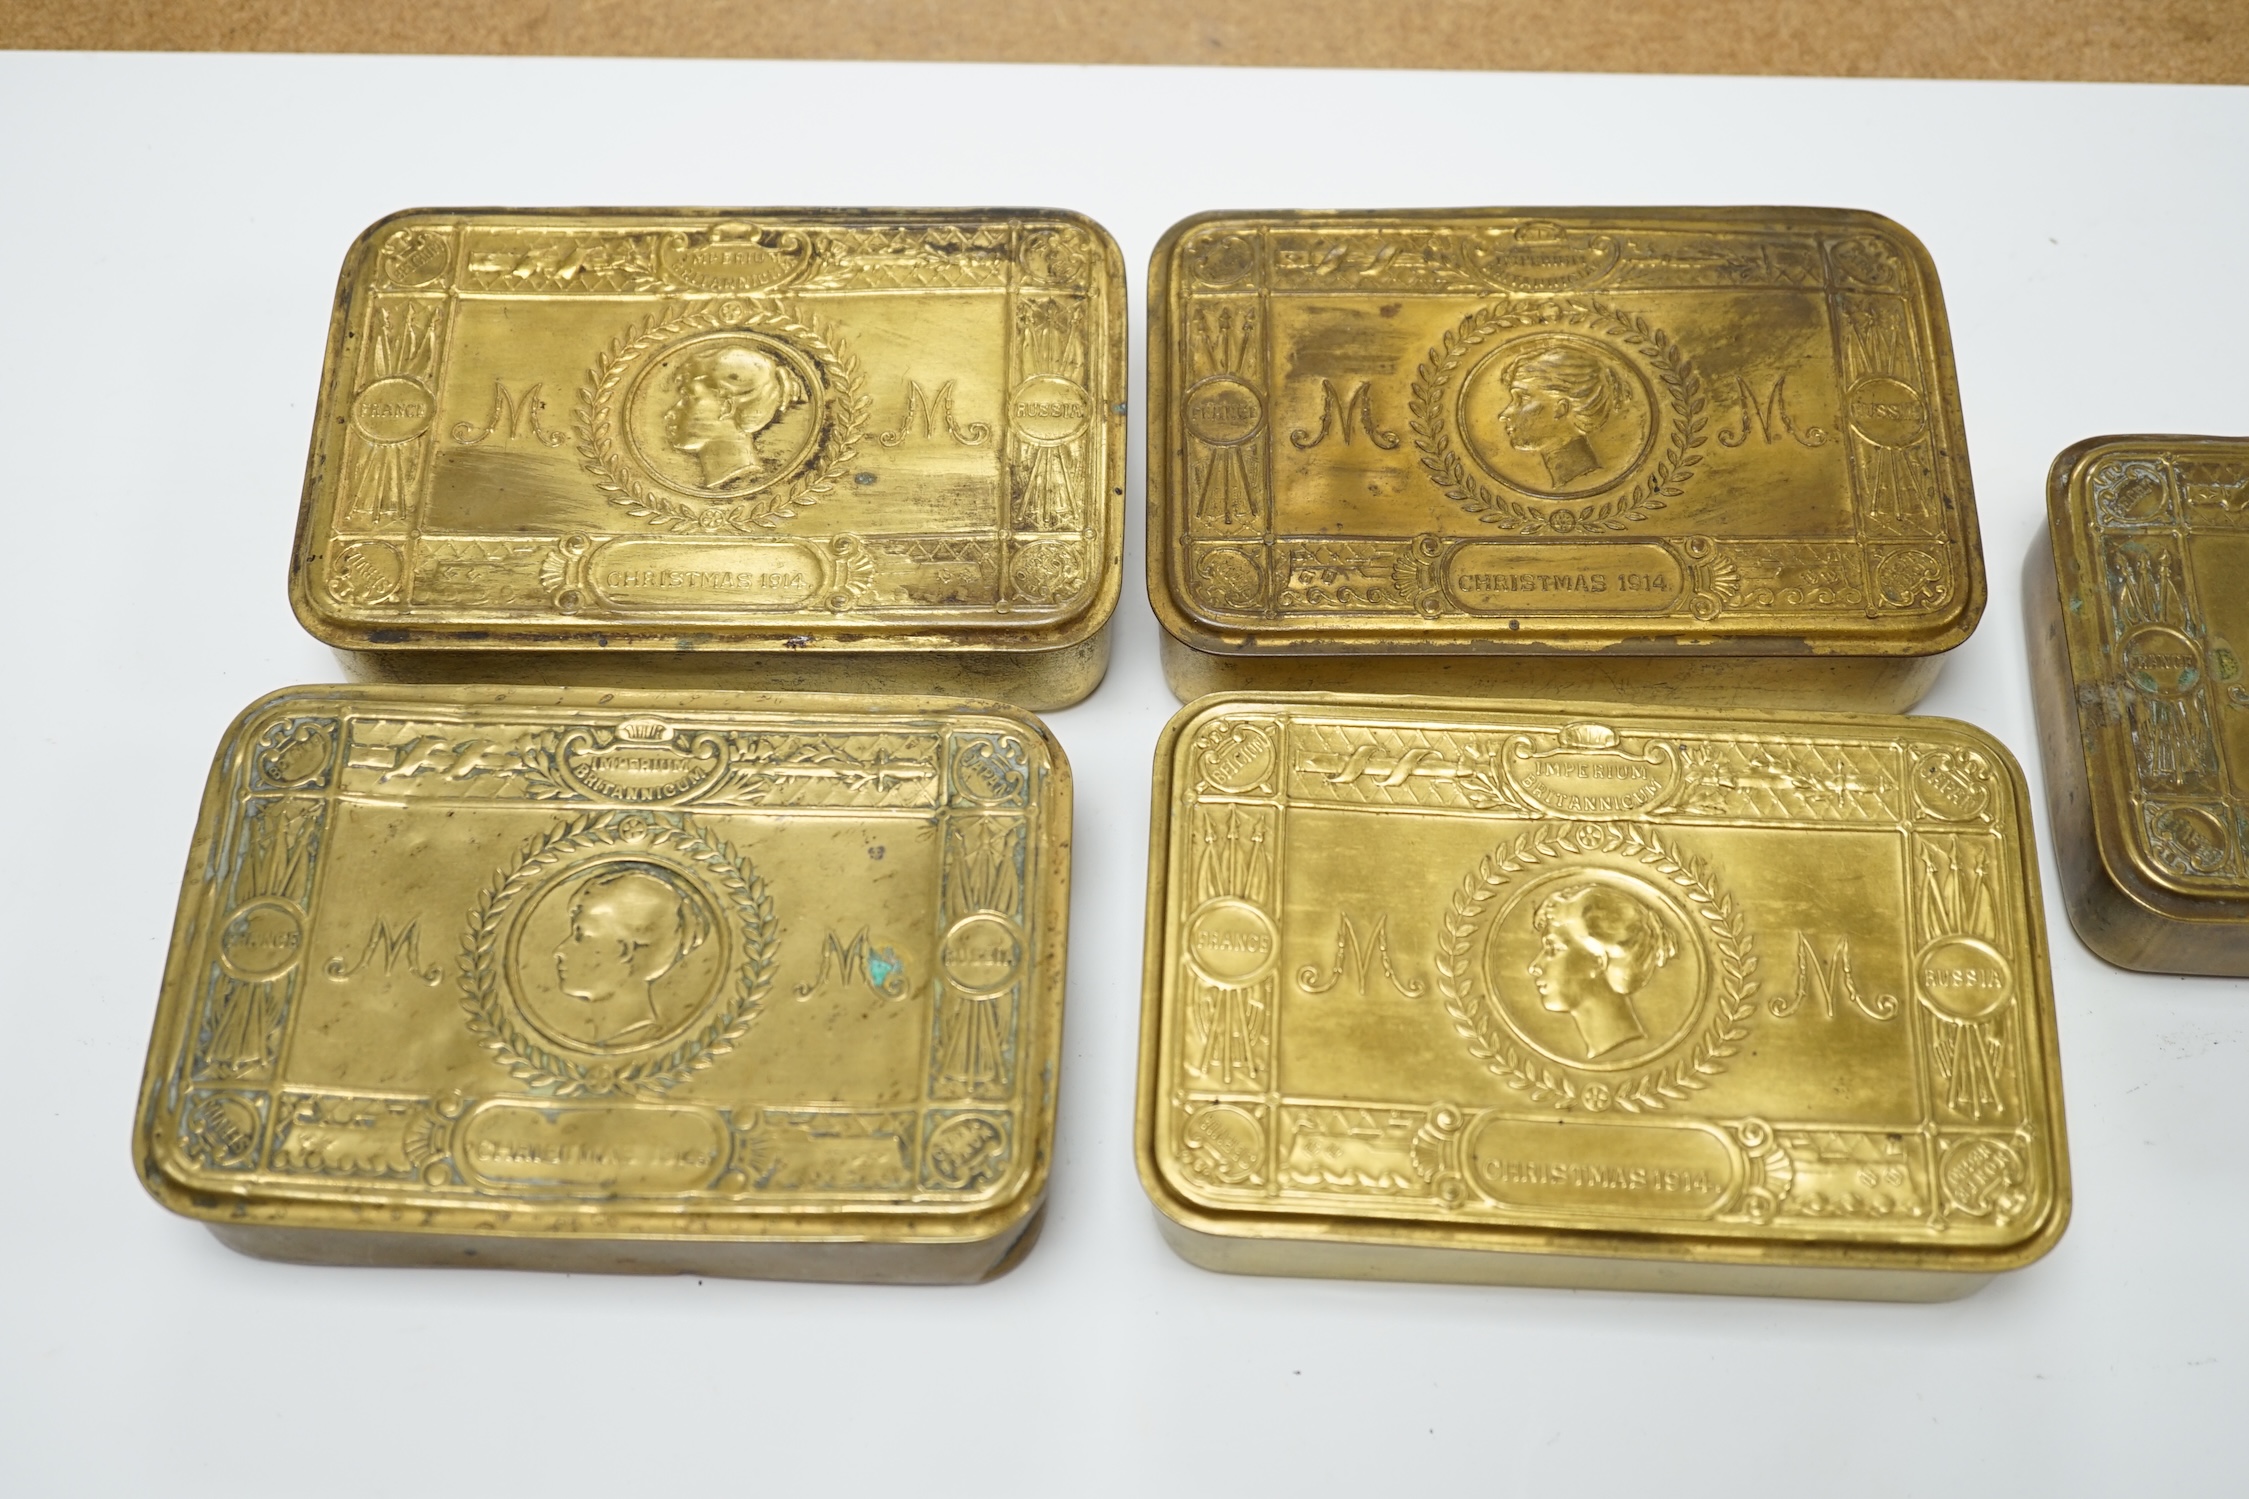 Five First World War Princess Mary Christmas 1914 tins. Condition - fair, contents missing